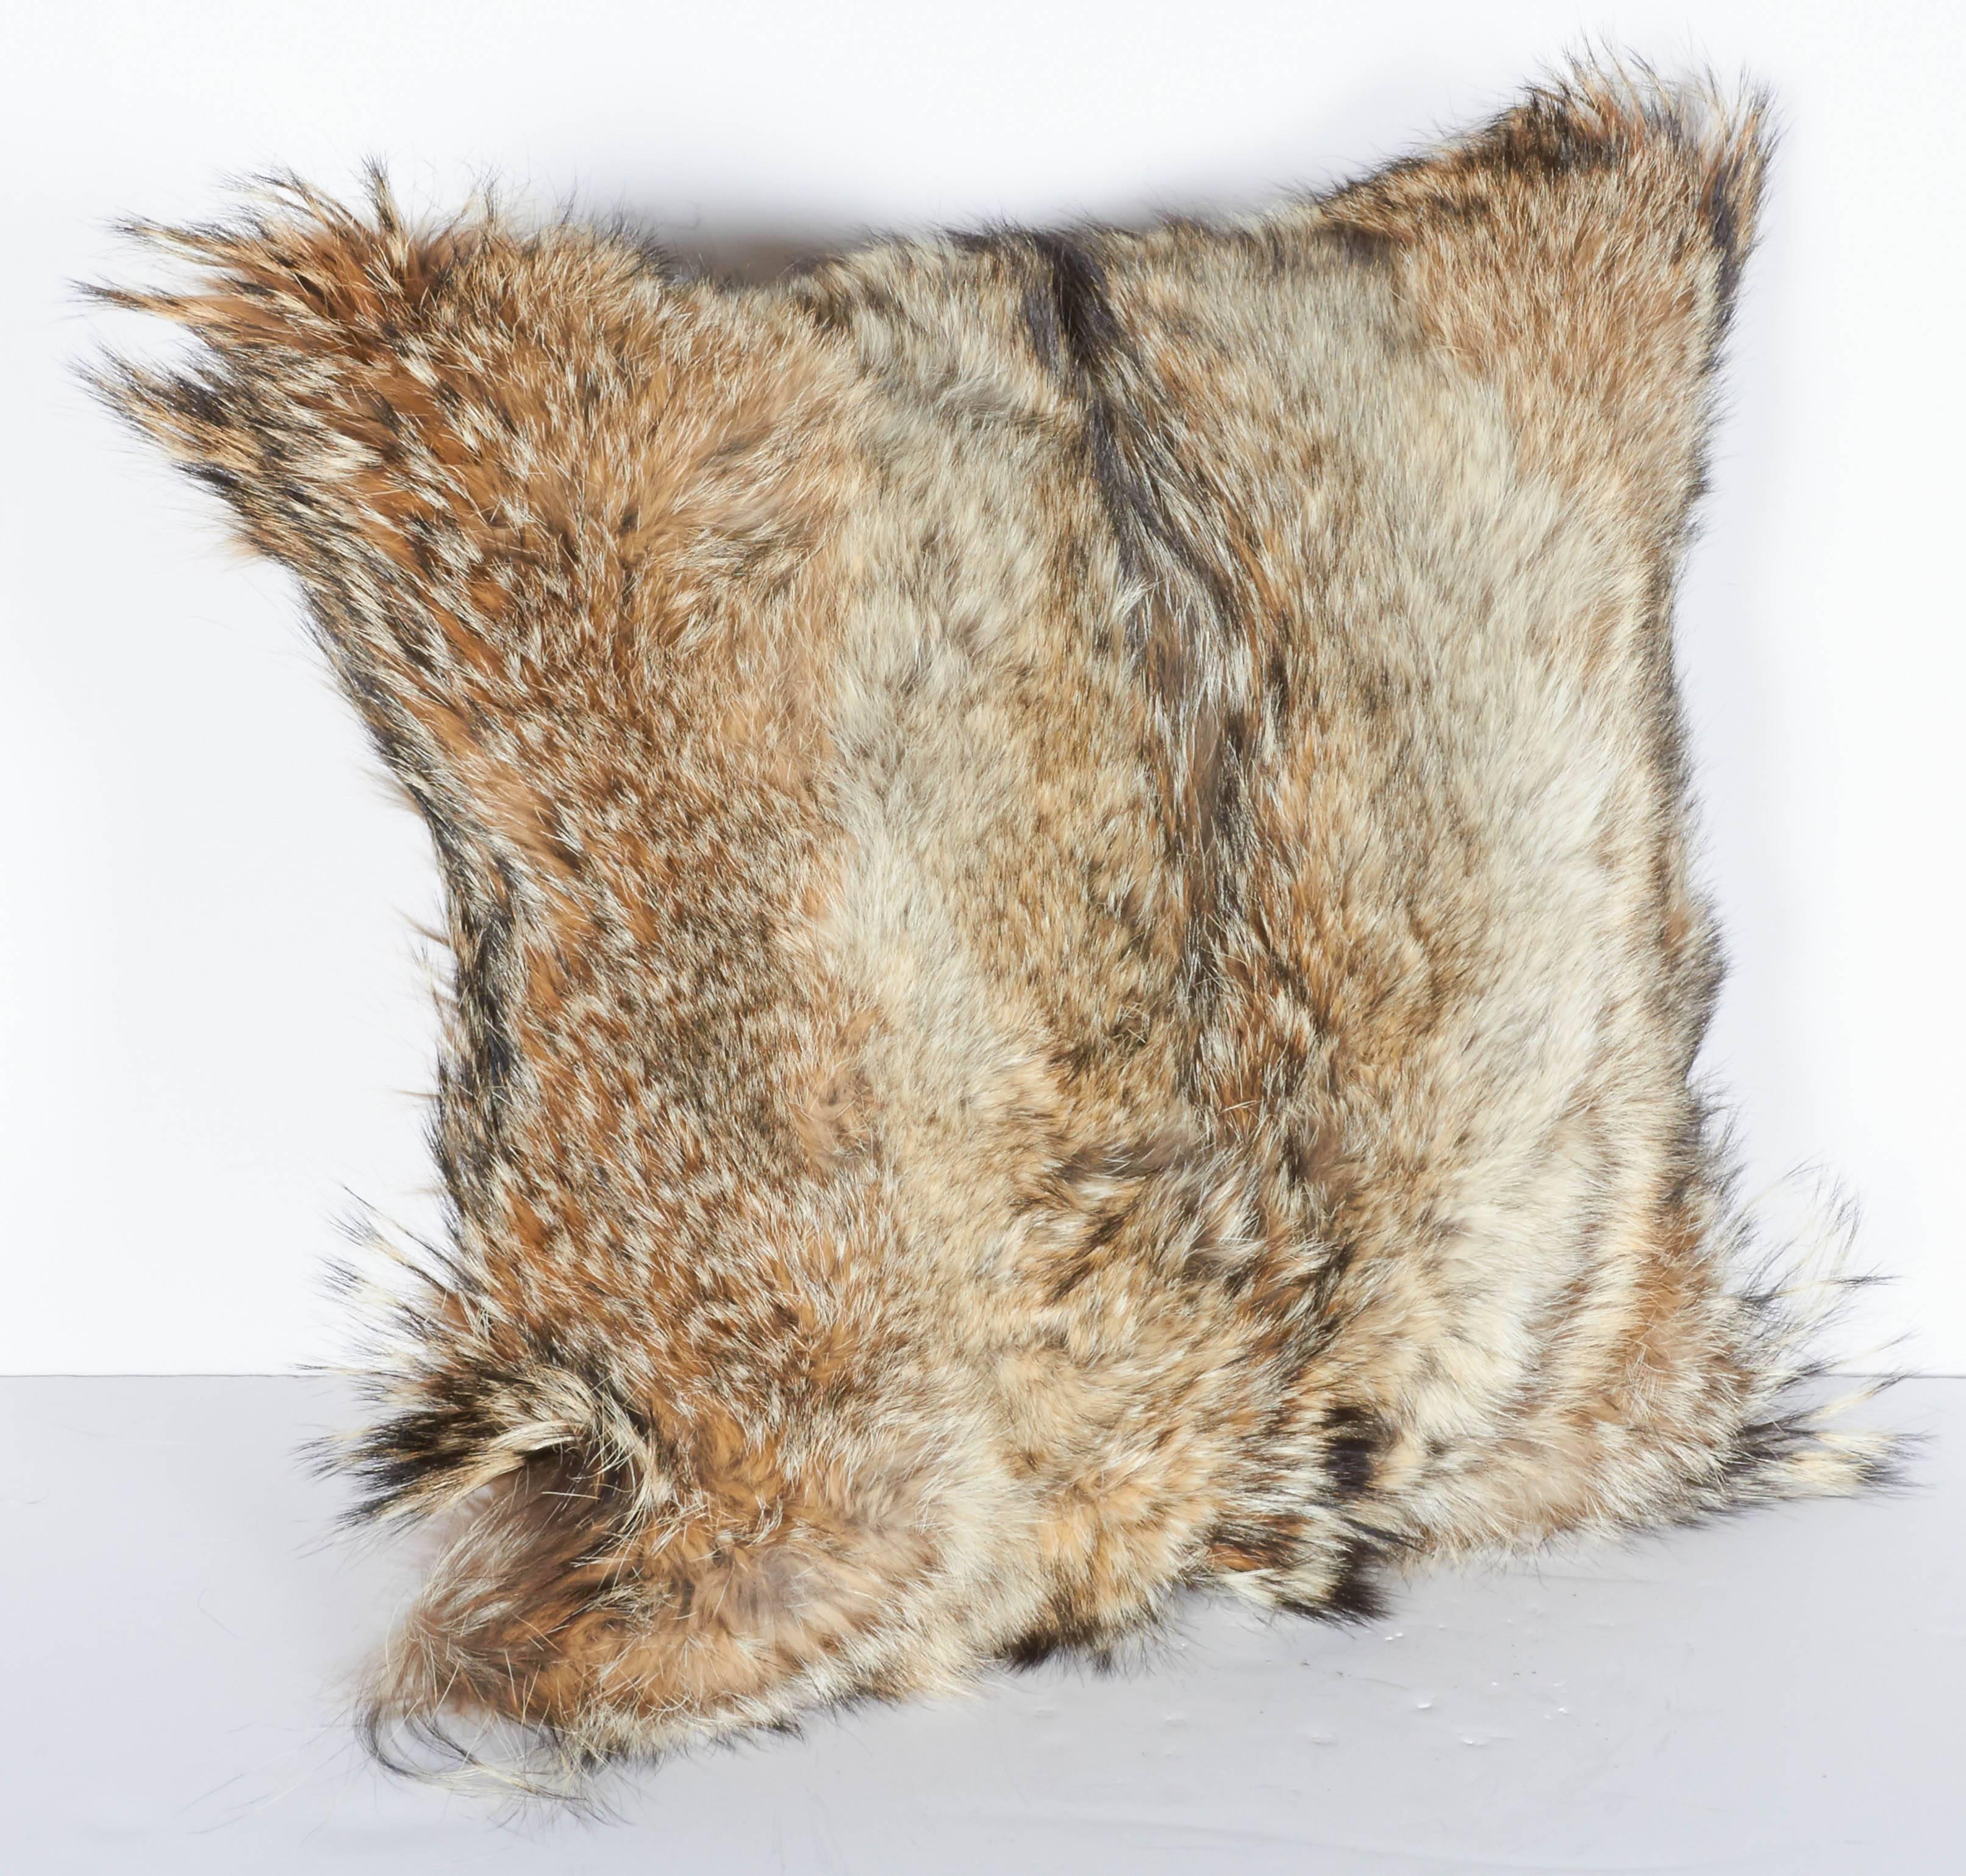 Custom made ultra luxe decorative pillows handcrafted from coyote fur in hues of, tan, camel, ivory and brown, with the occasional black streaks. Each pillow is unique in coloration and texture, and features hand-stitched backing in fine khaki